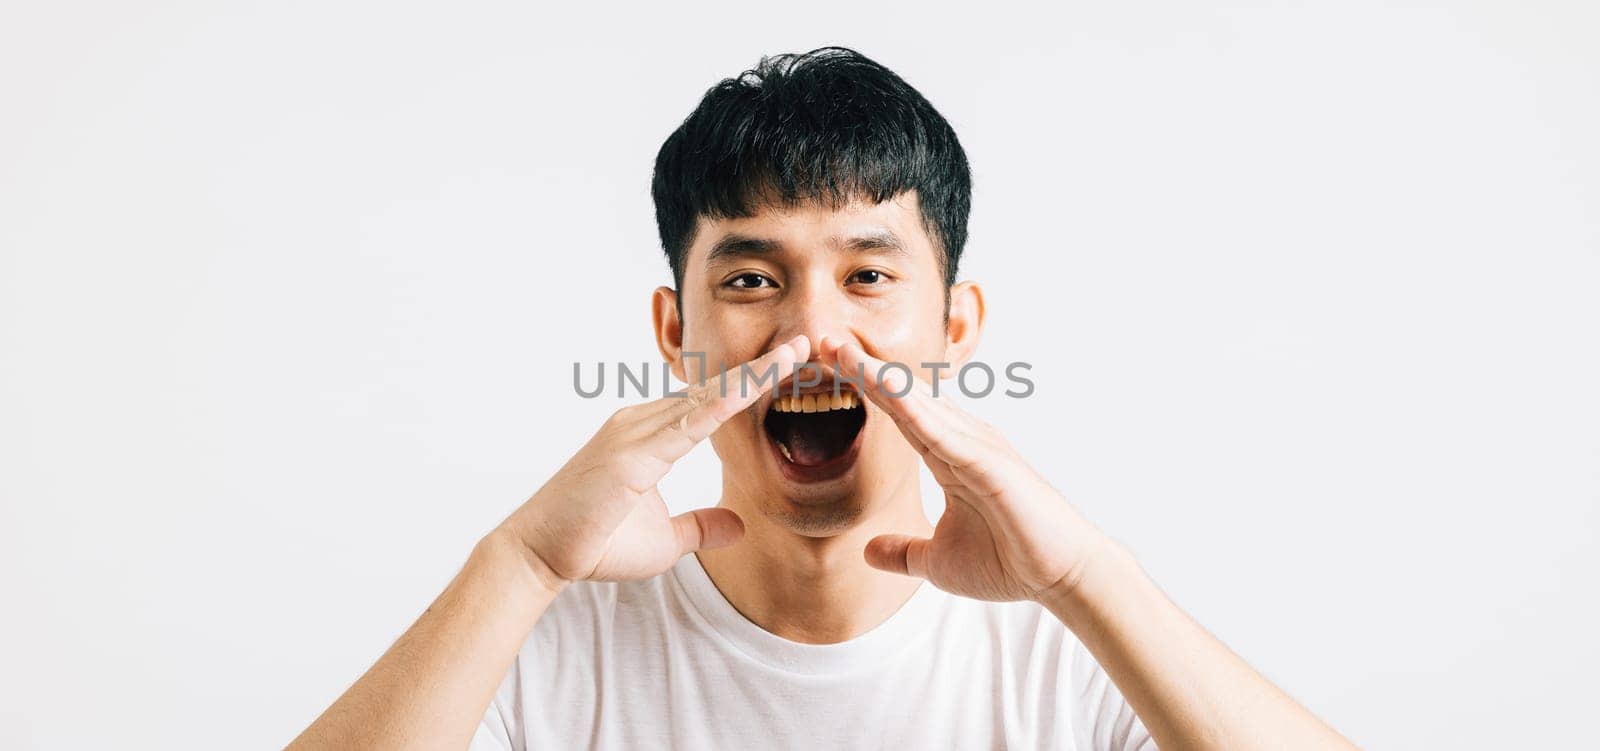 Young Asian man, with a hand on his mouth, shares news or announcements in a studio setting. Isolated on white, ideal for adding your message or copy.